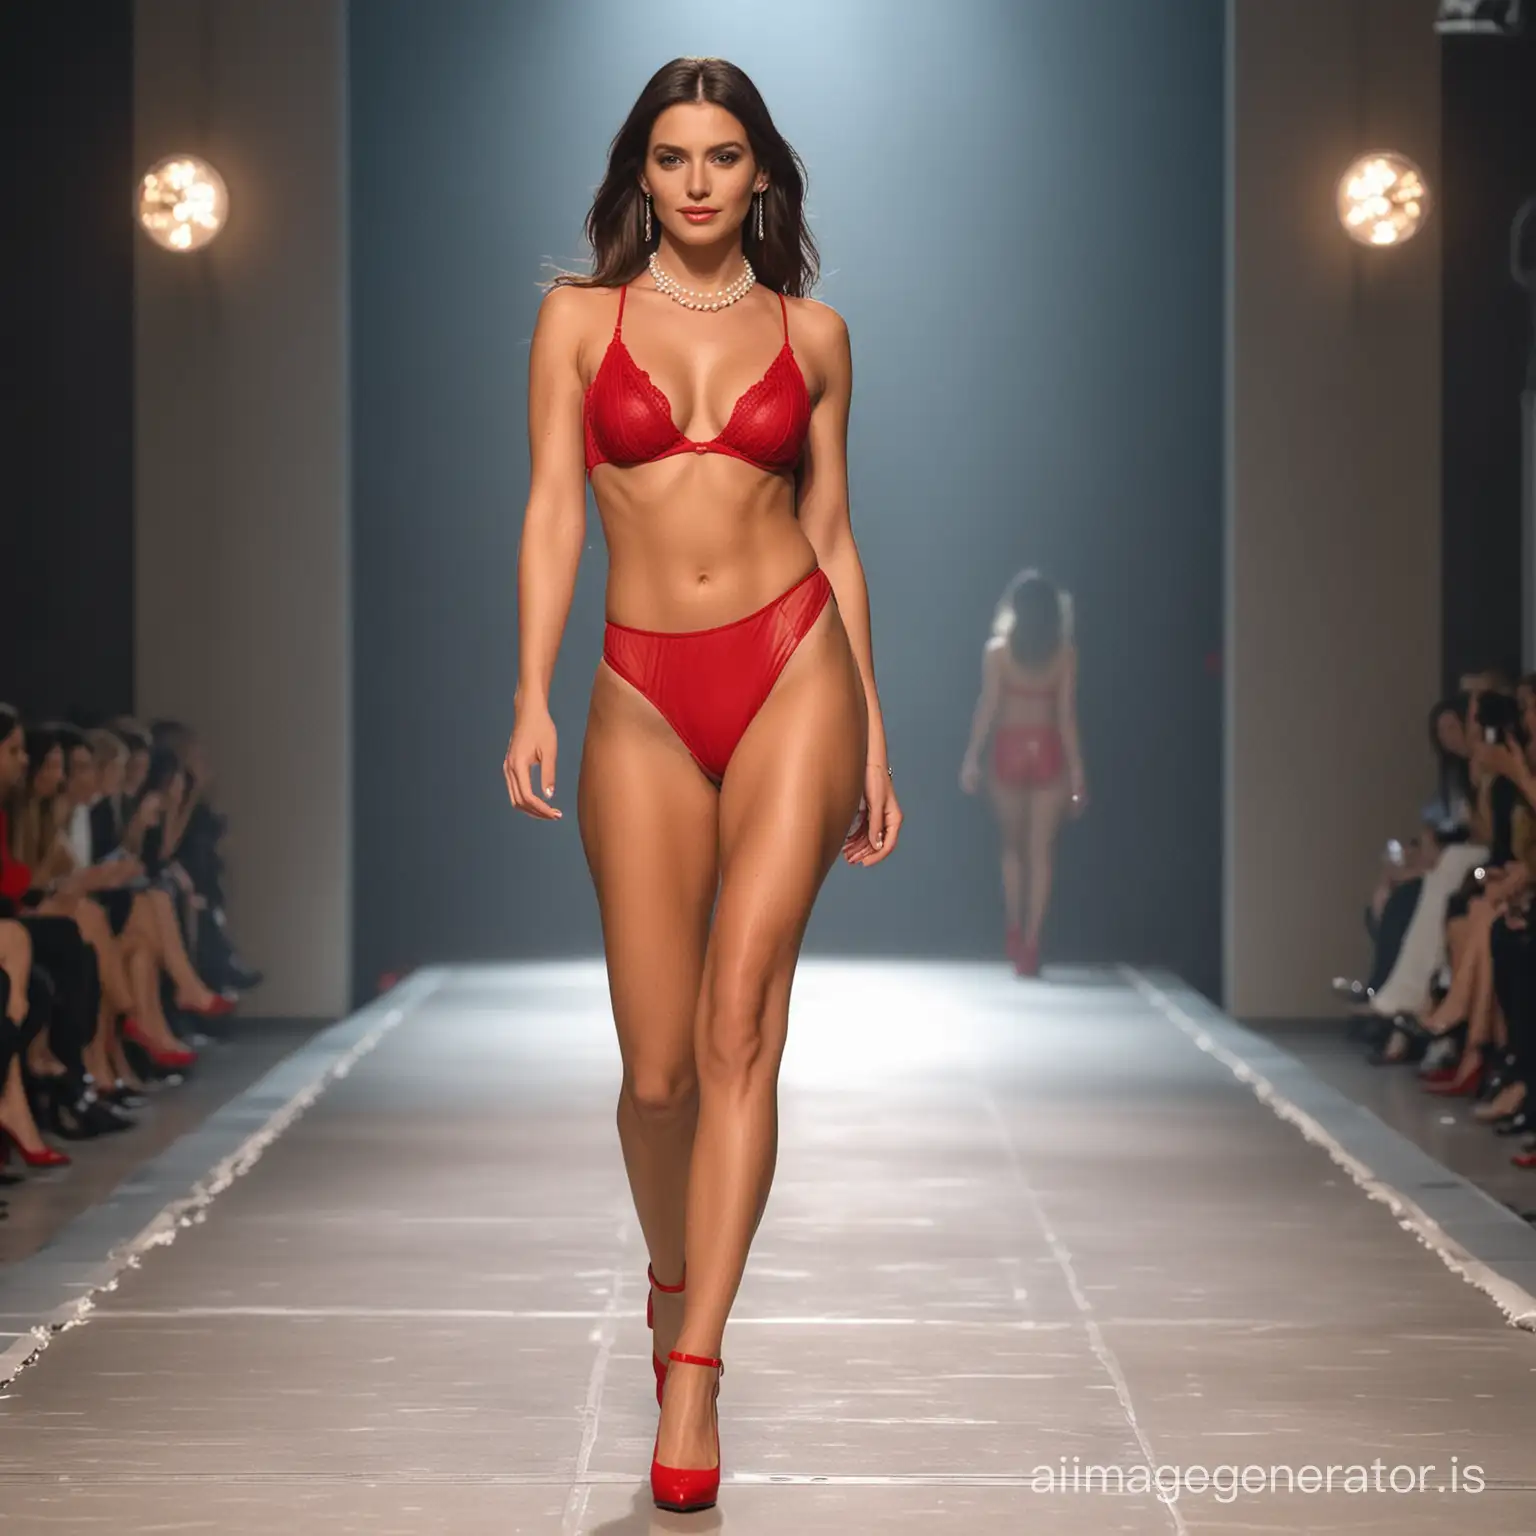 A super sexy Italian influencer model with a perfect full body, wearing red stiletto underwear and shoes, and a pearl necklace. She is strutting on a runway in Milan.